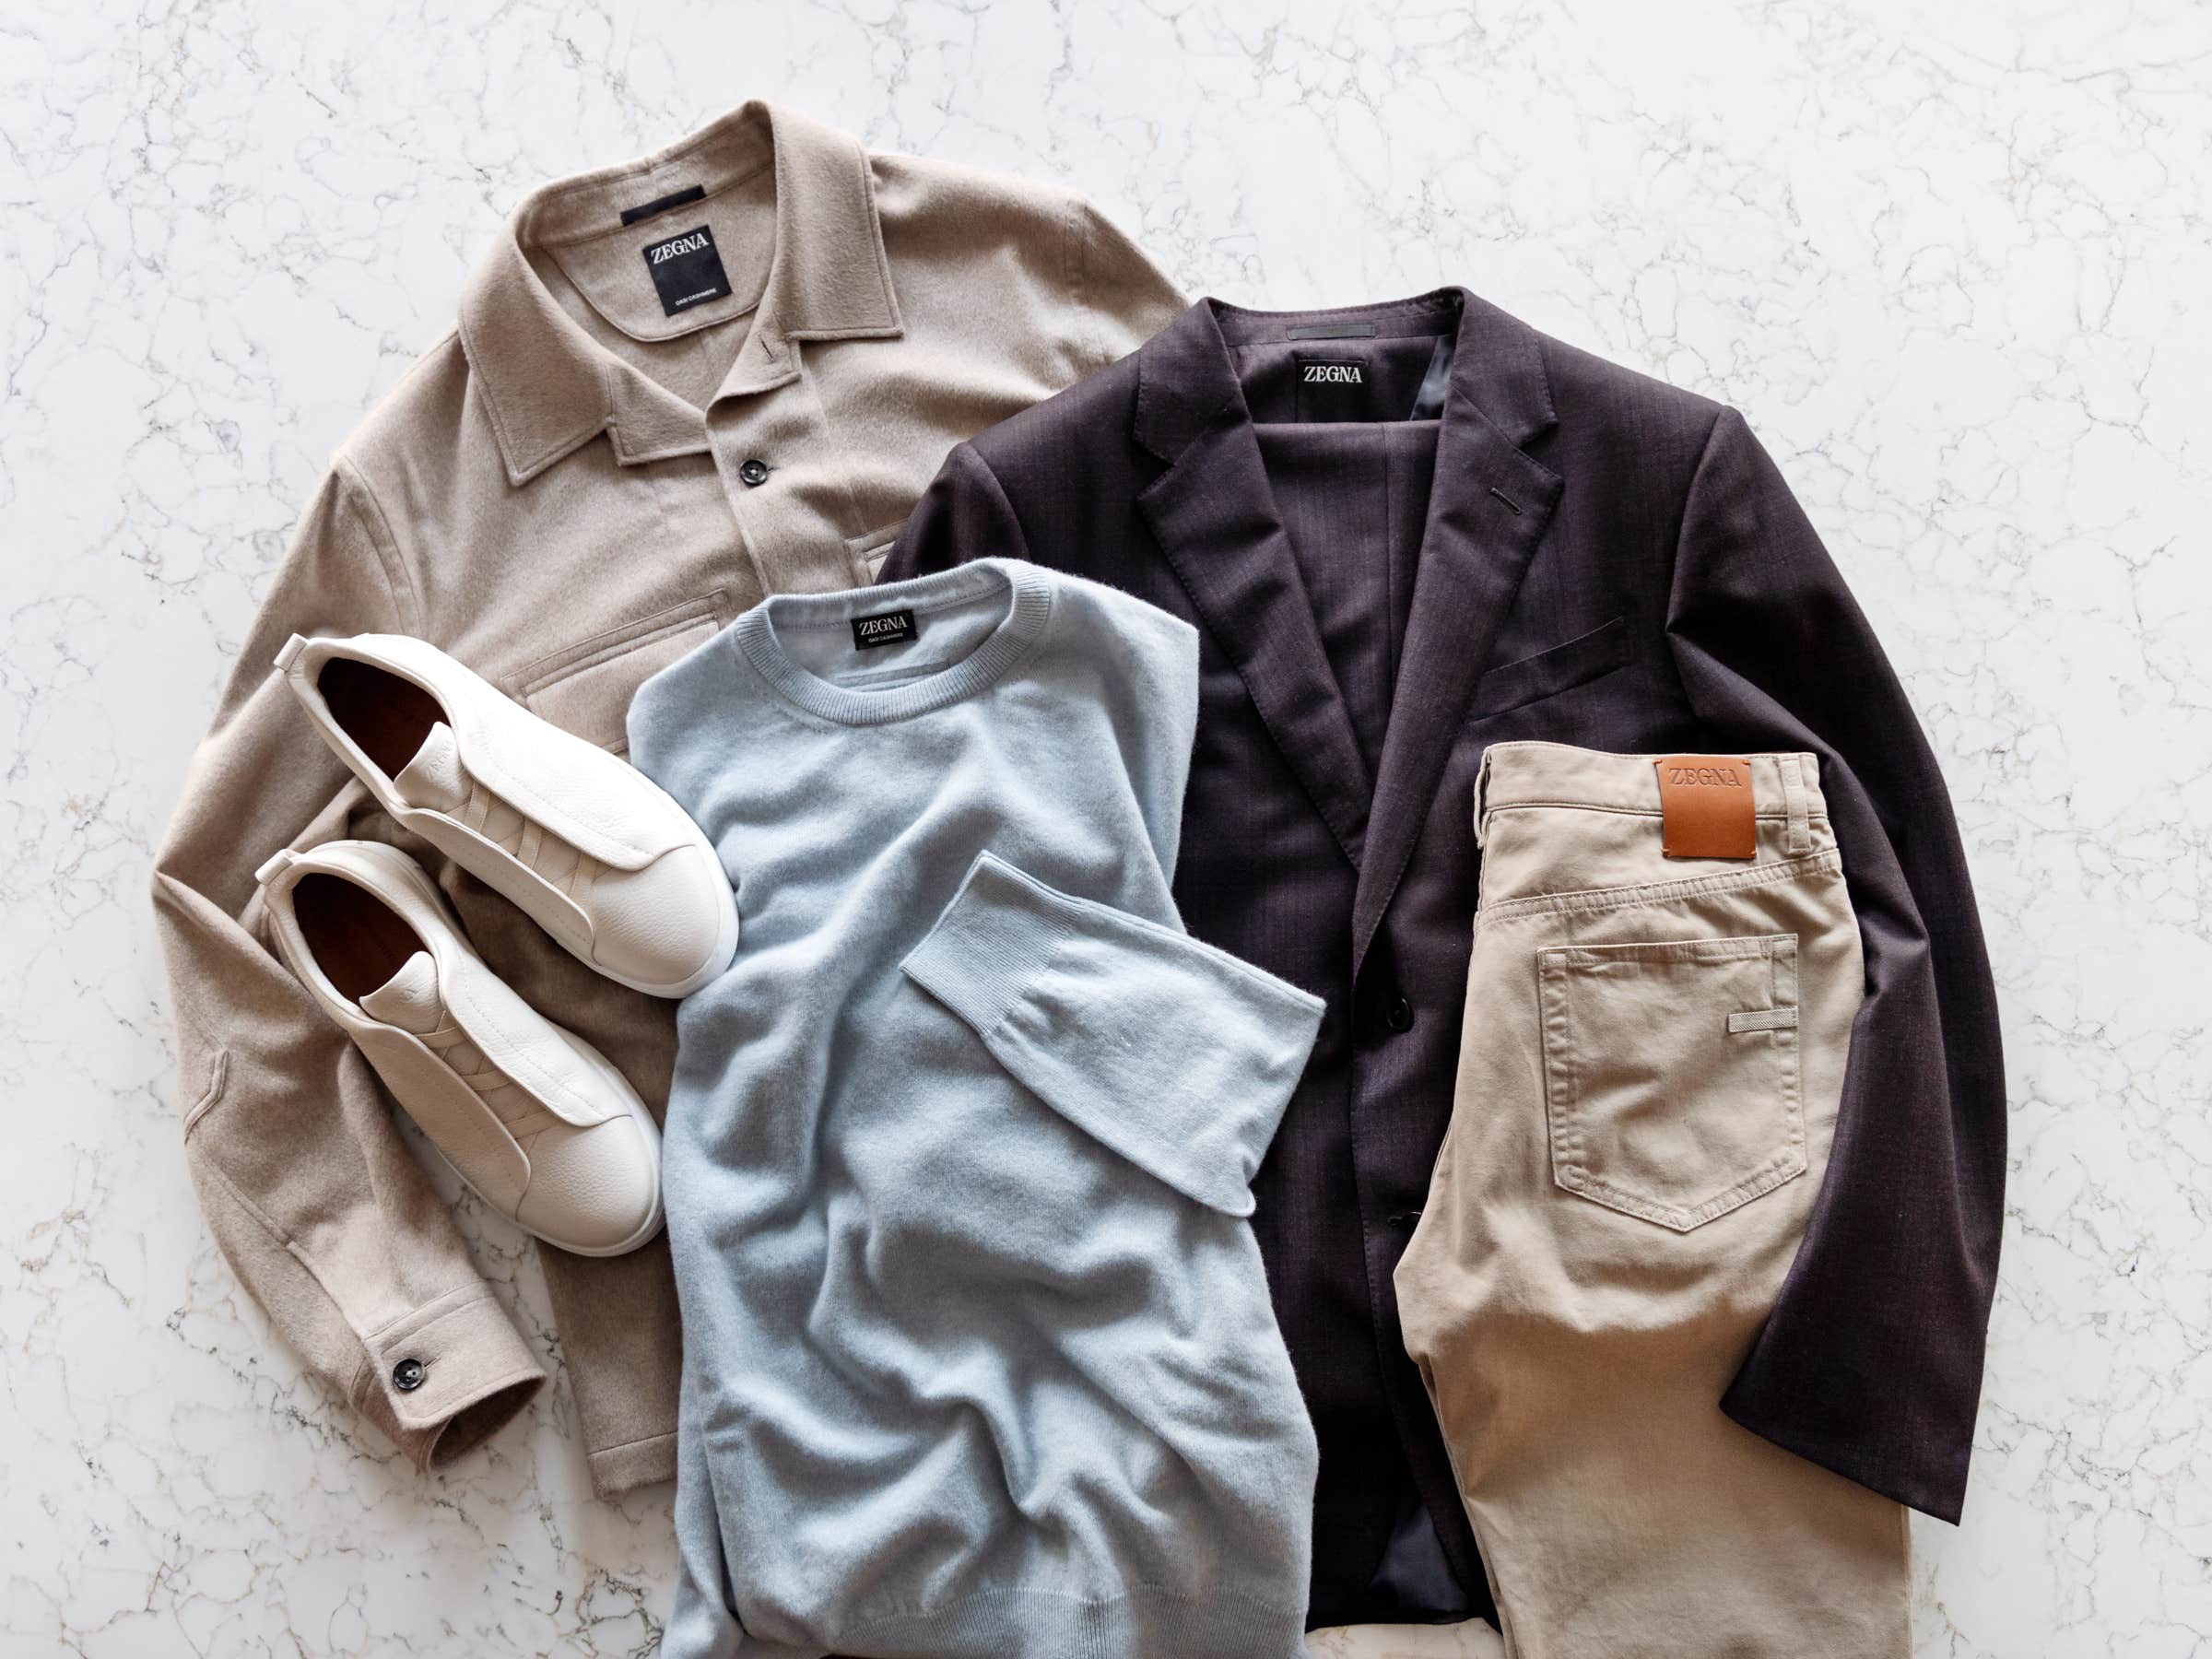 ZEGNA Oasi Cashmere Overshirt, ZEGNA Oasi Cashmere Crewneck, ZEGNA Trofeo Wool Burgundy Suit, ZEGNA Khaki City Fit 5-Pocket Jean and ZEGNA Triple Stitch Sneaker all laid out on a marble table